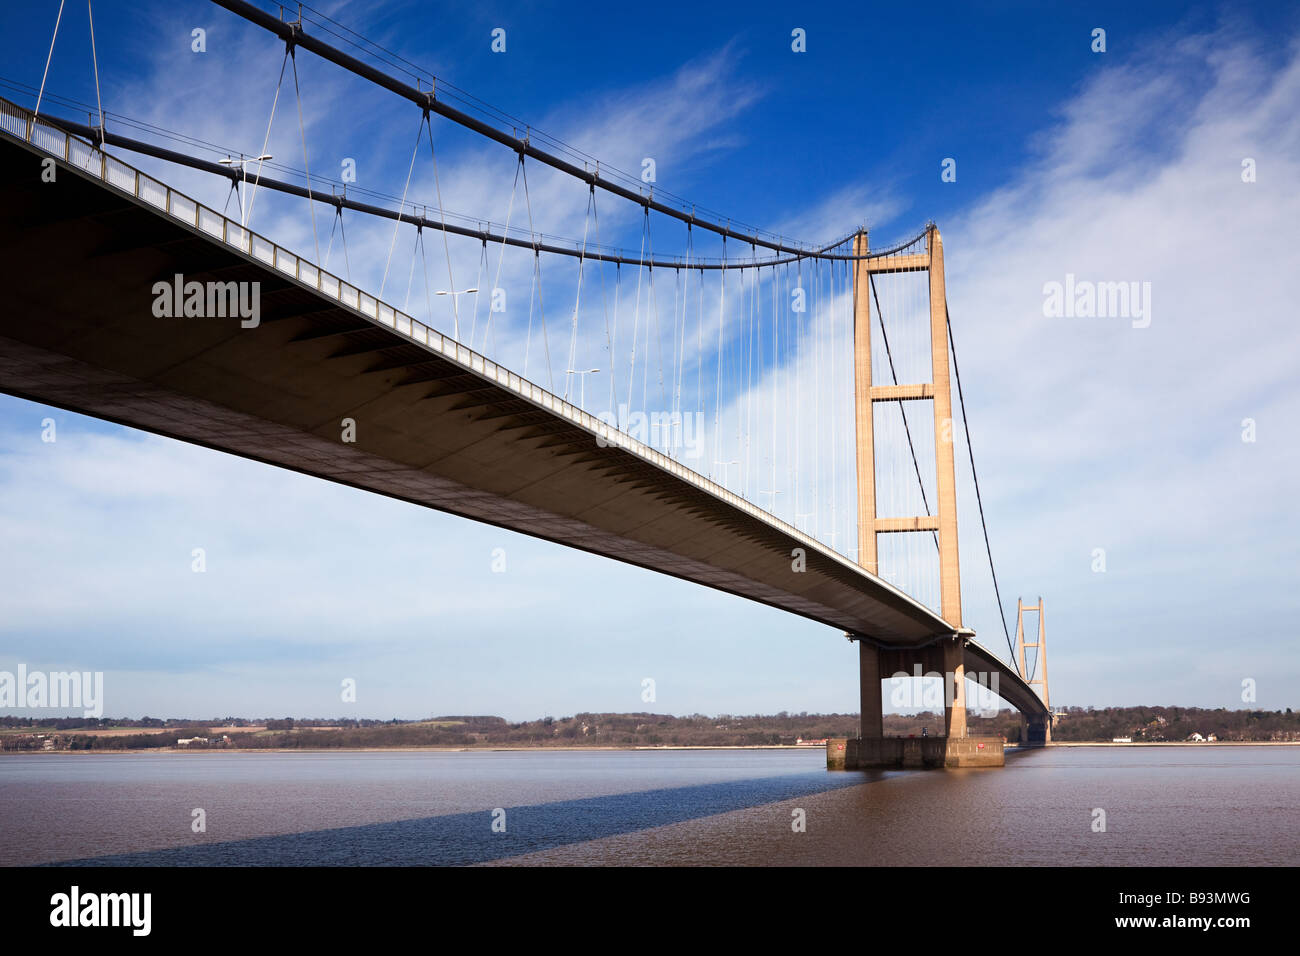 The Humber Bridge over the River Humber near Hull, Yorkshire, England, UK looking north Stock Photo